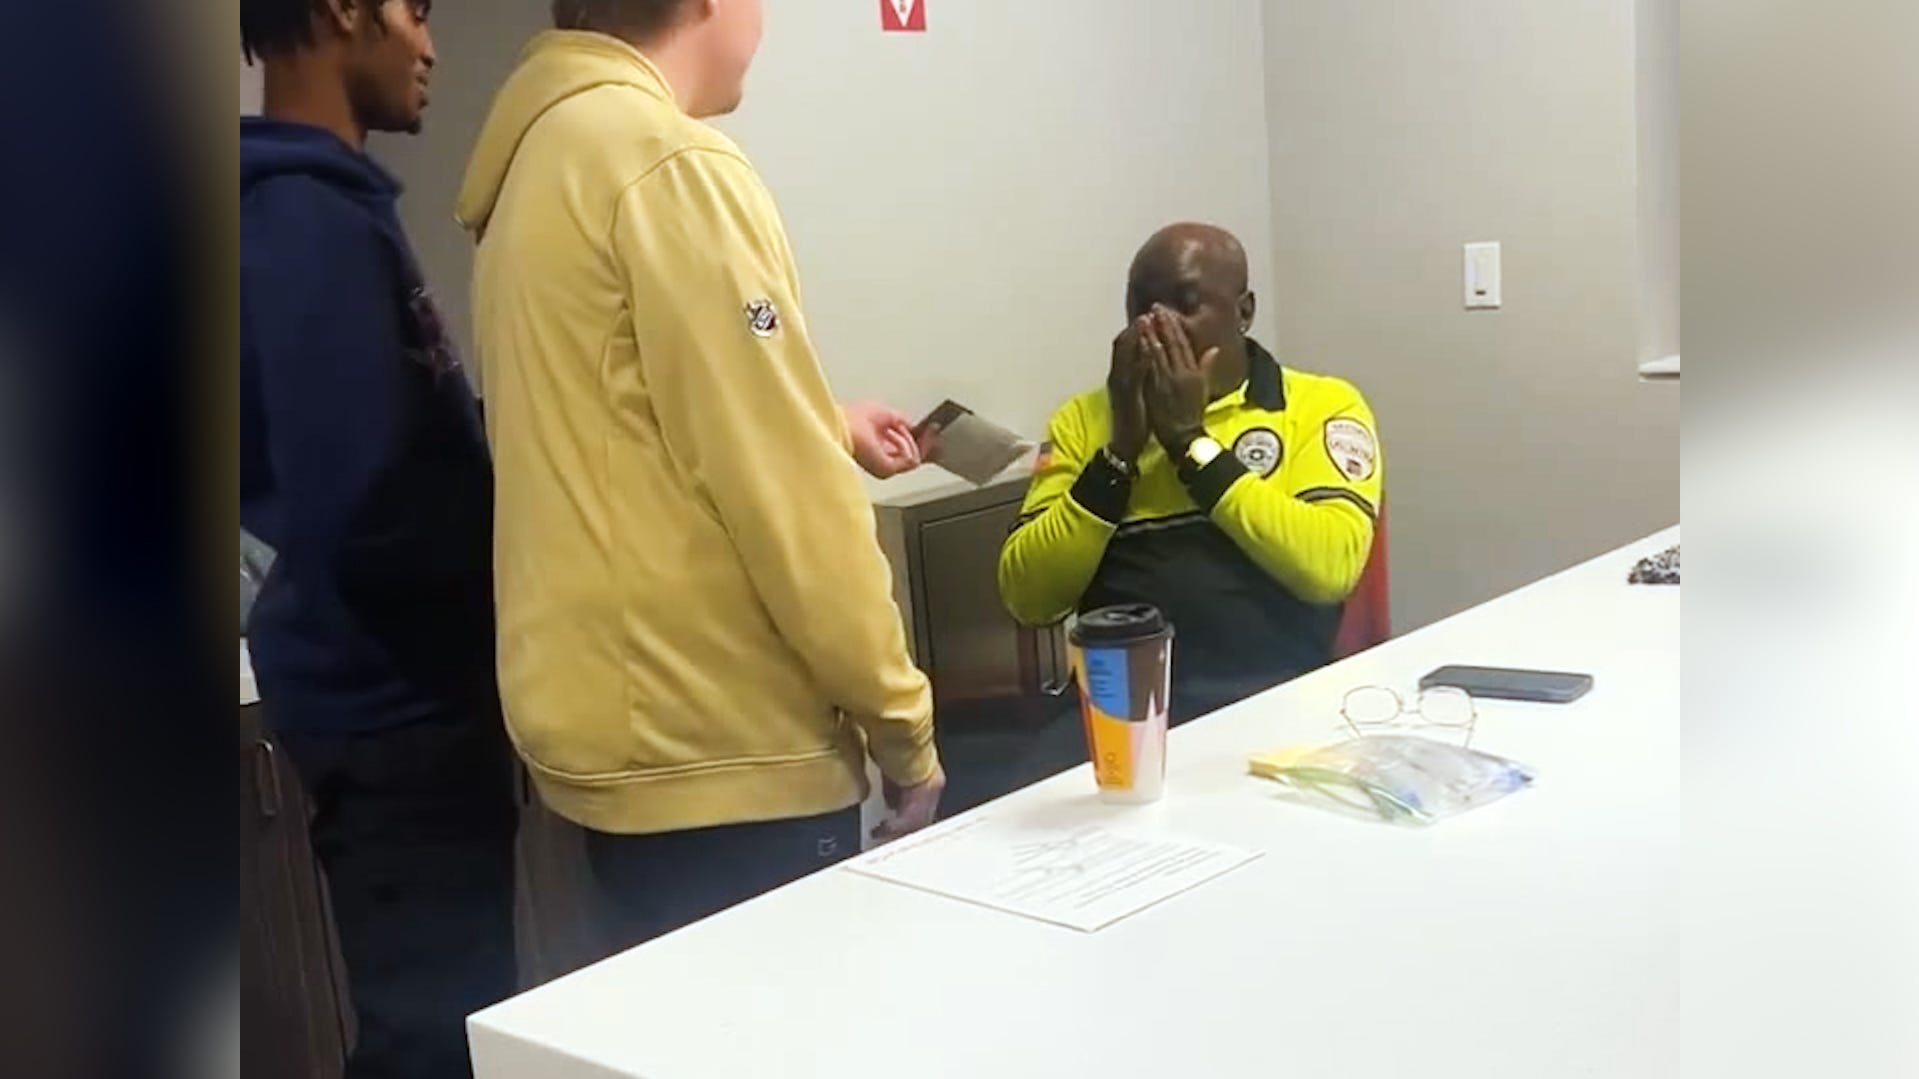 Security guard's dream comes true when college students raise funds to pay his way home